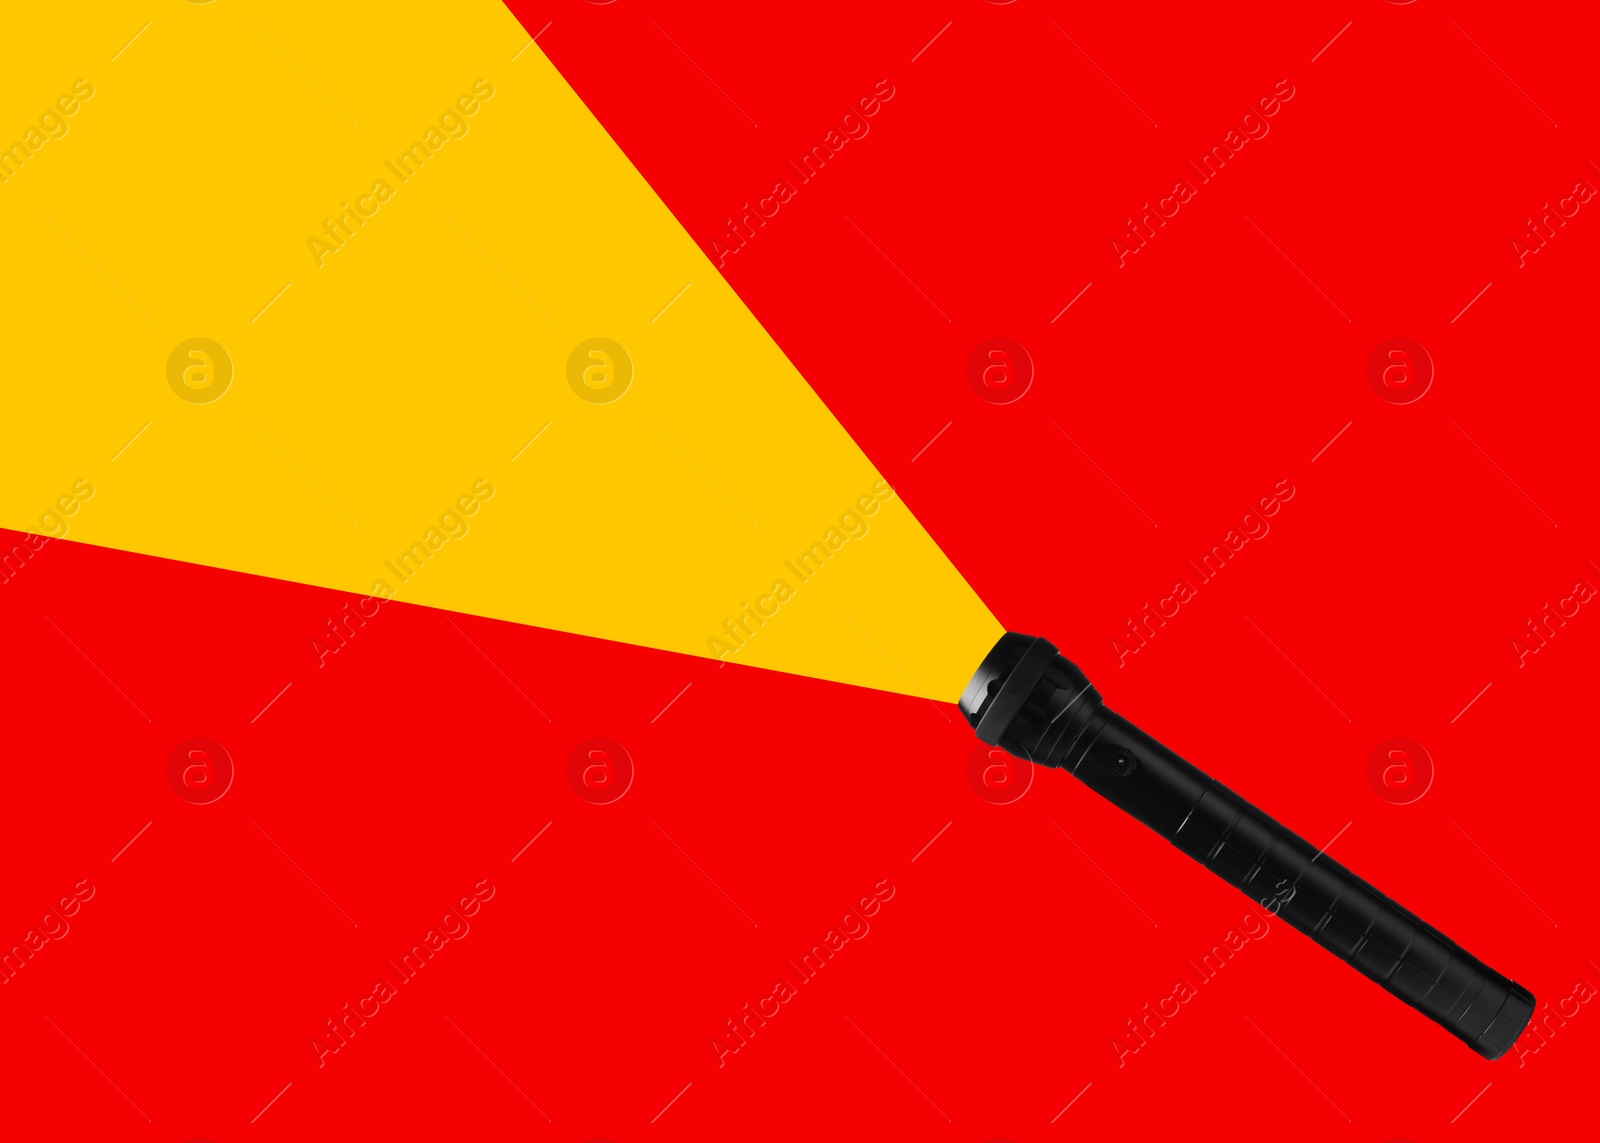 Image of Flashlight illuminating red background. Light symbolizing search, guidance, direction and other